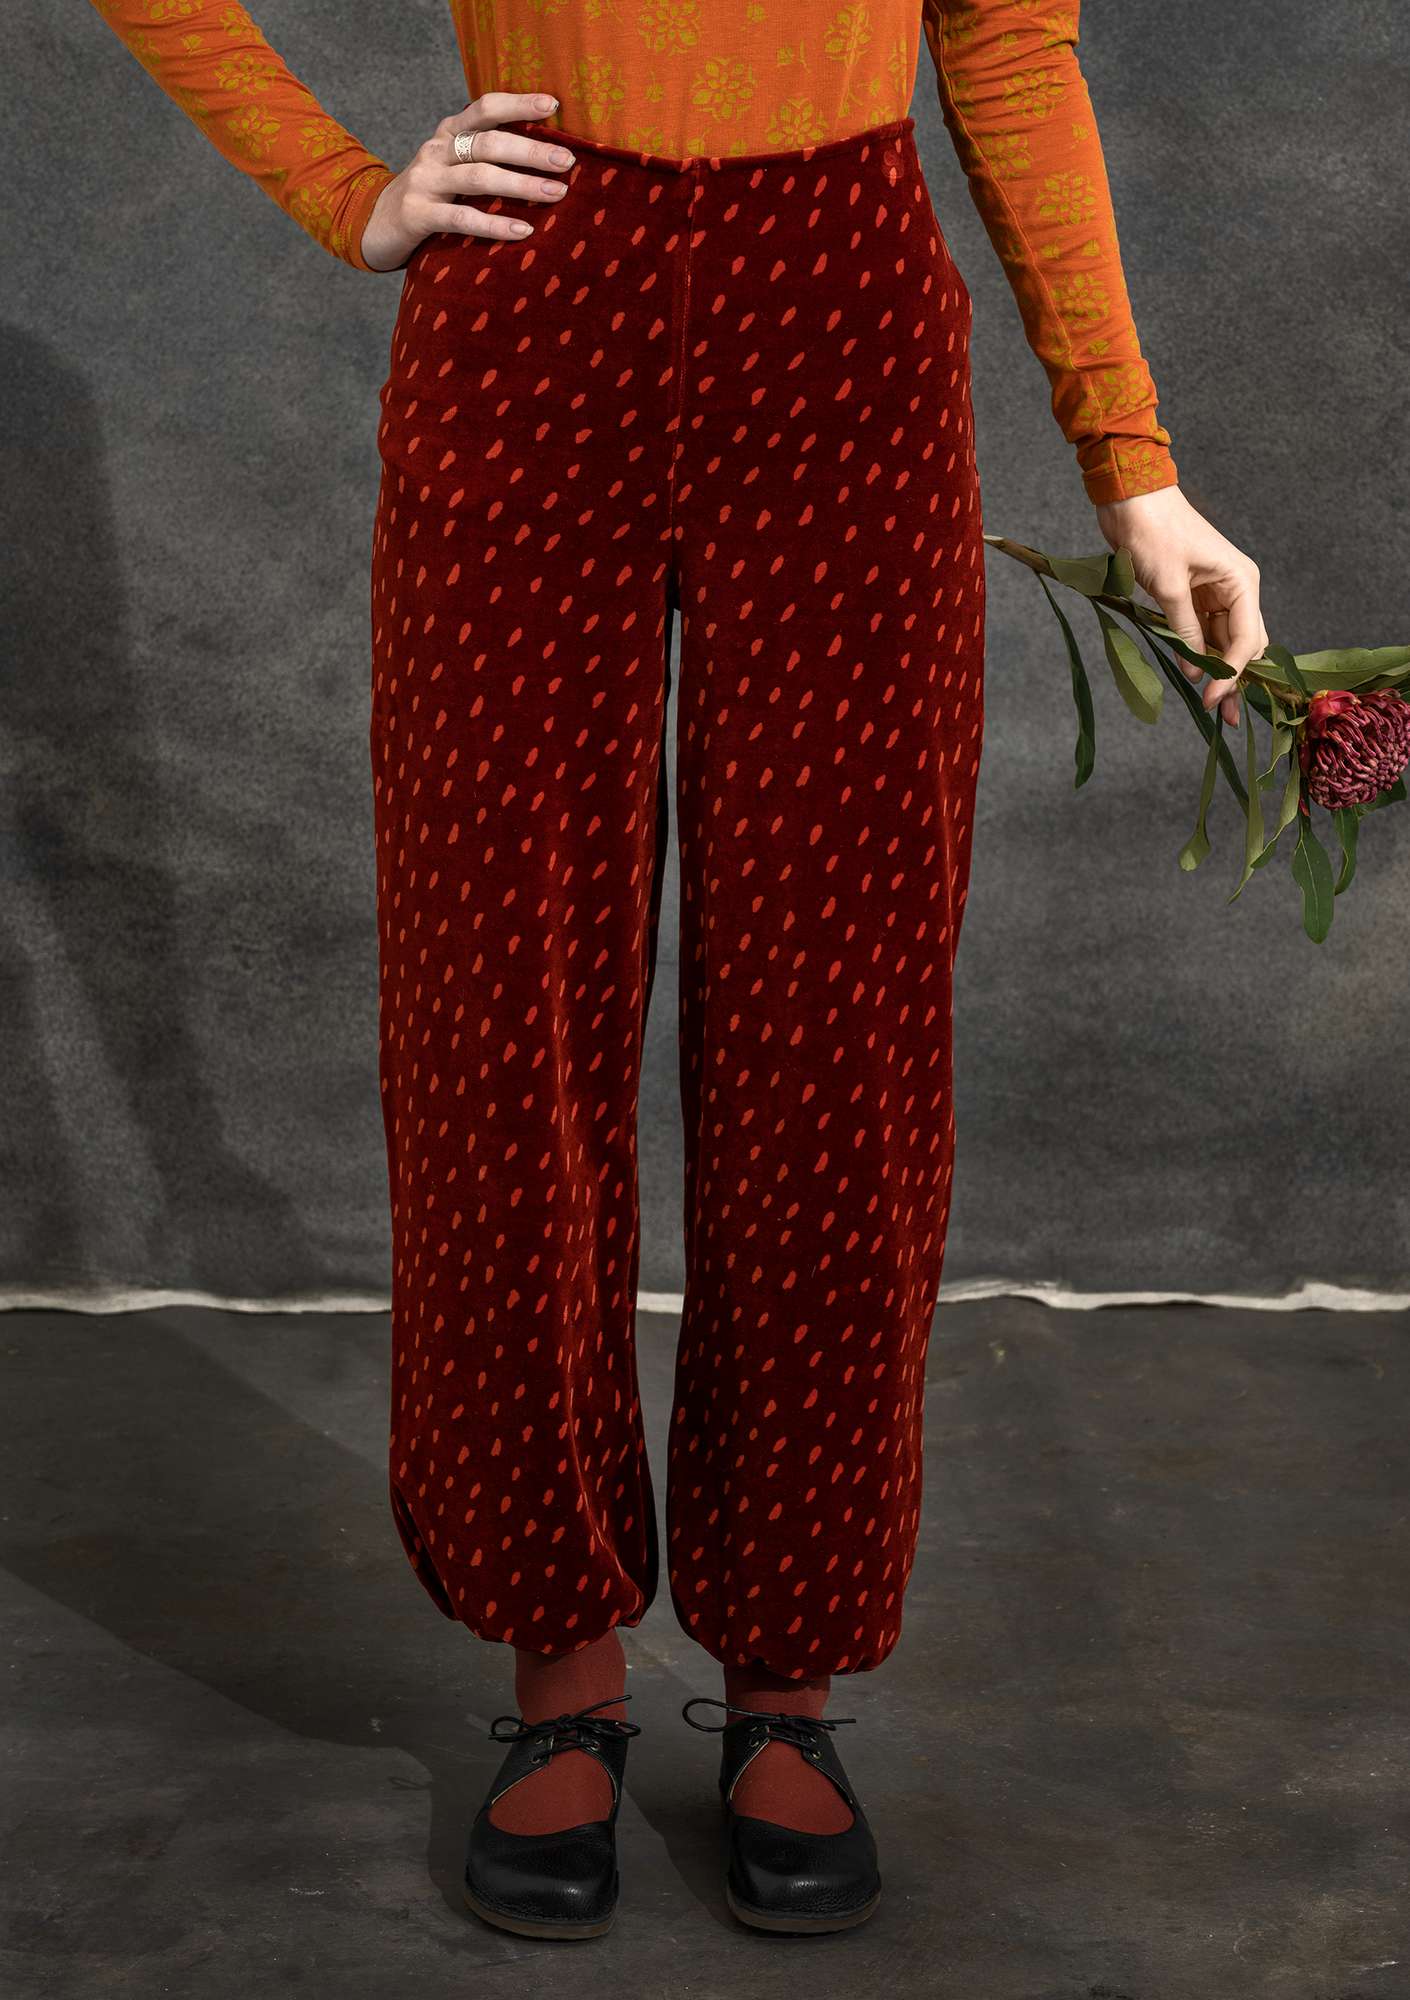 “Fauna” velour pants in organic cotton/recycled polyester chili/patterned thumbnail